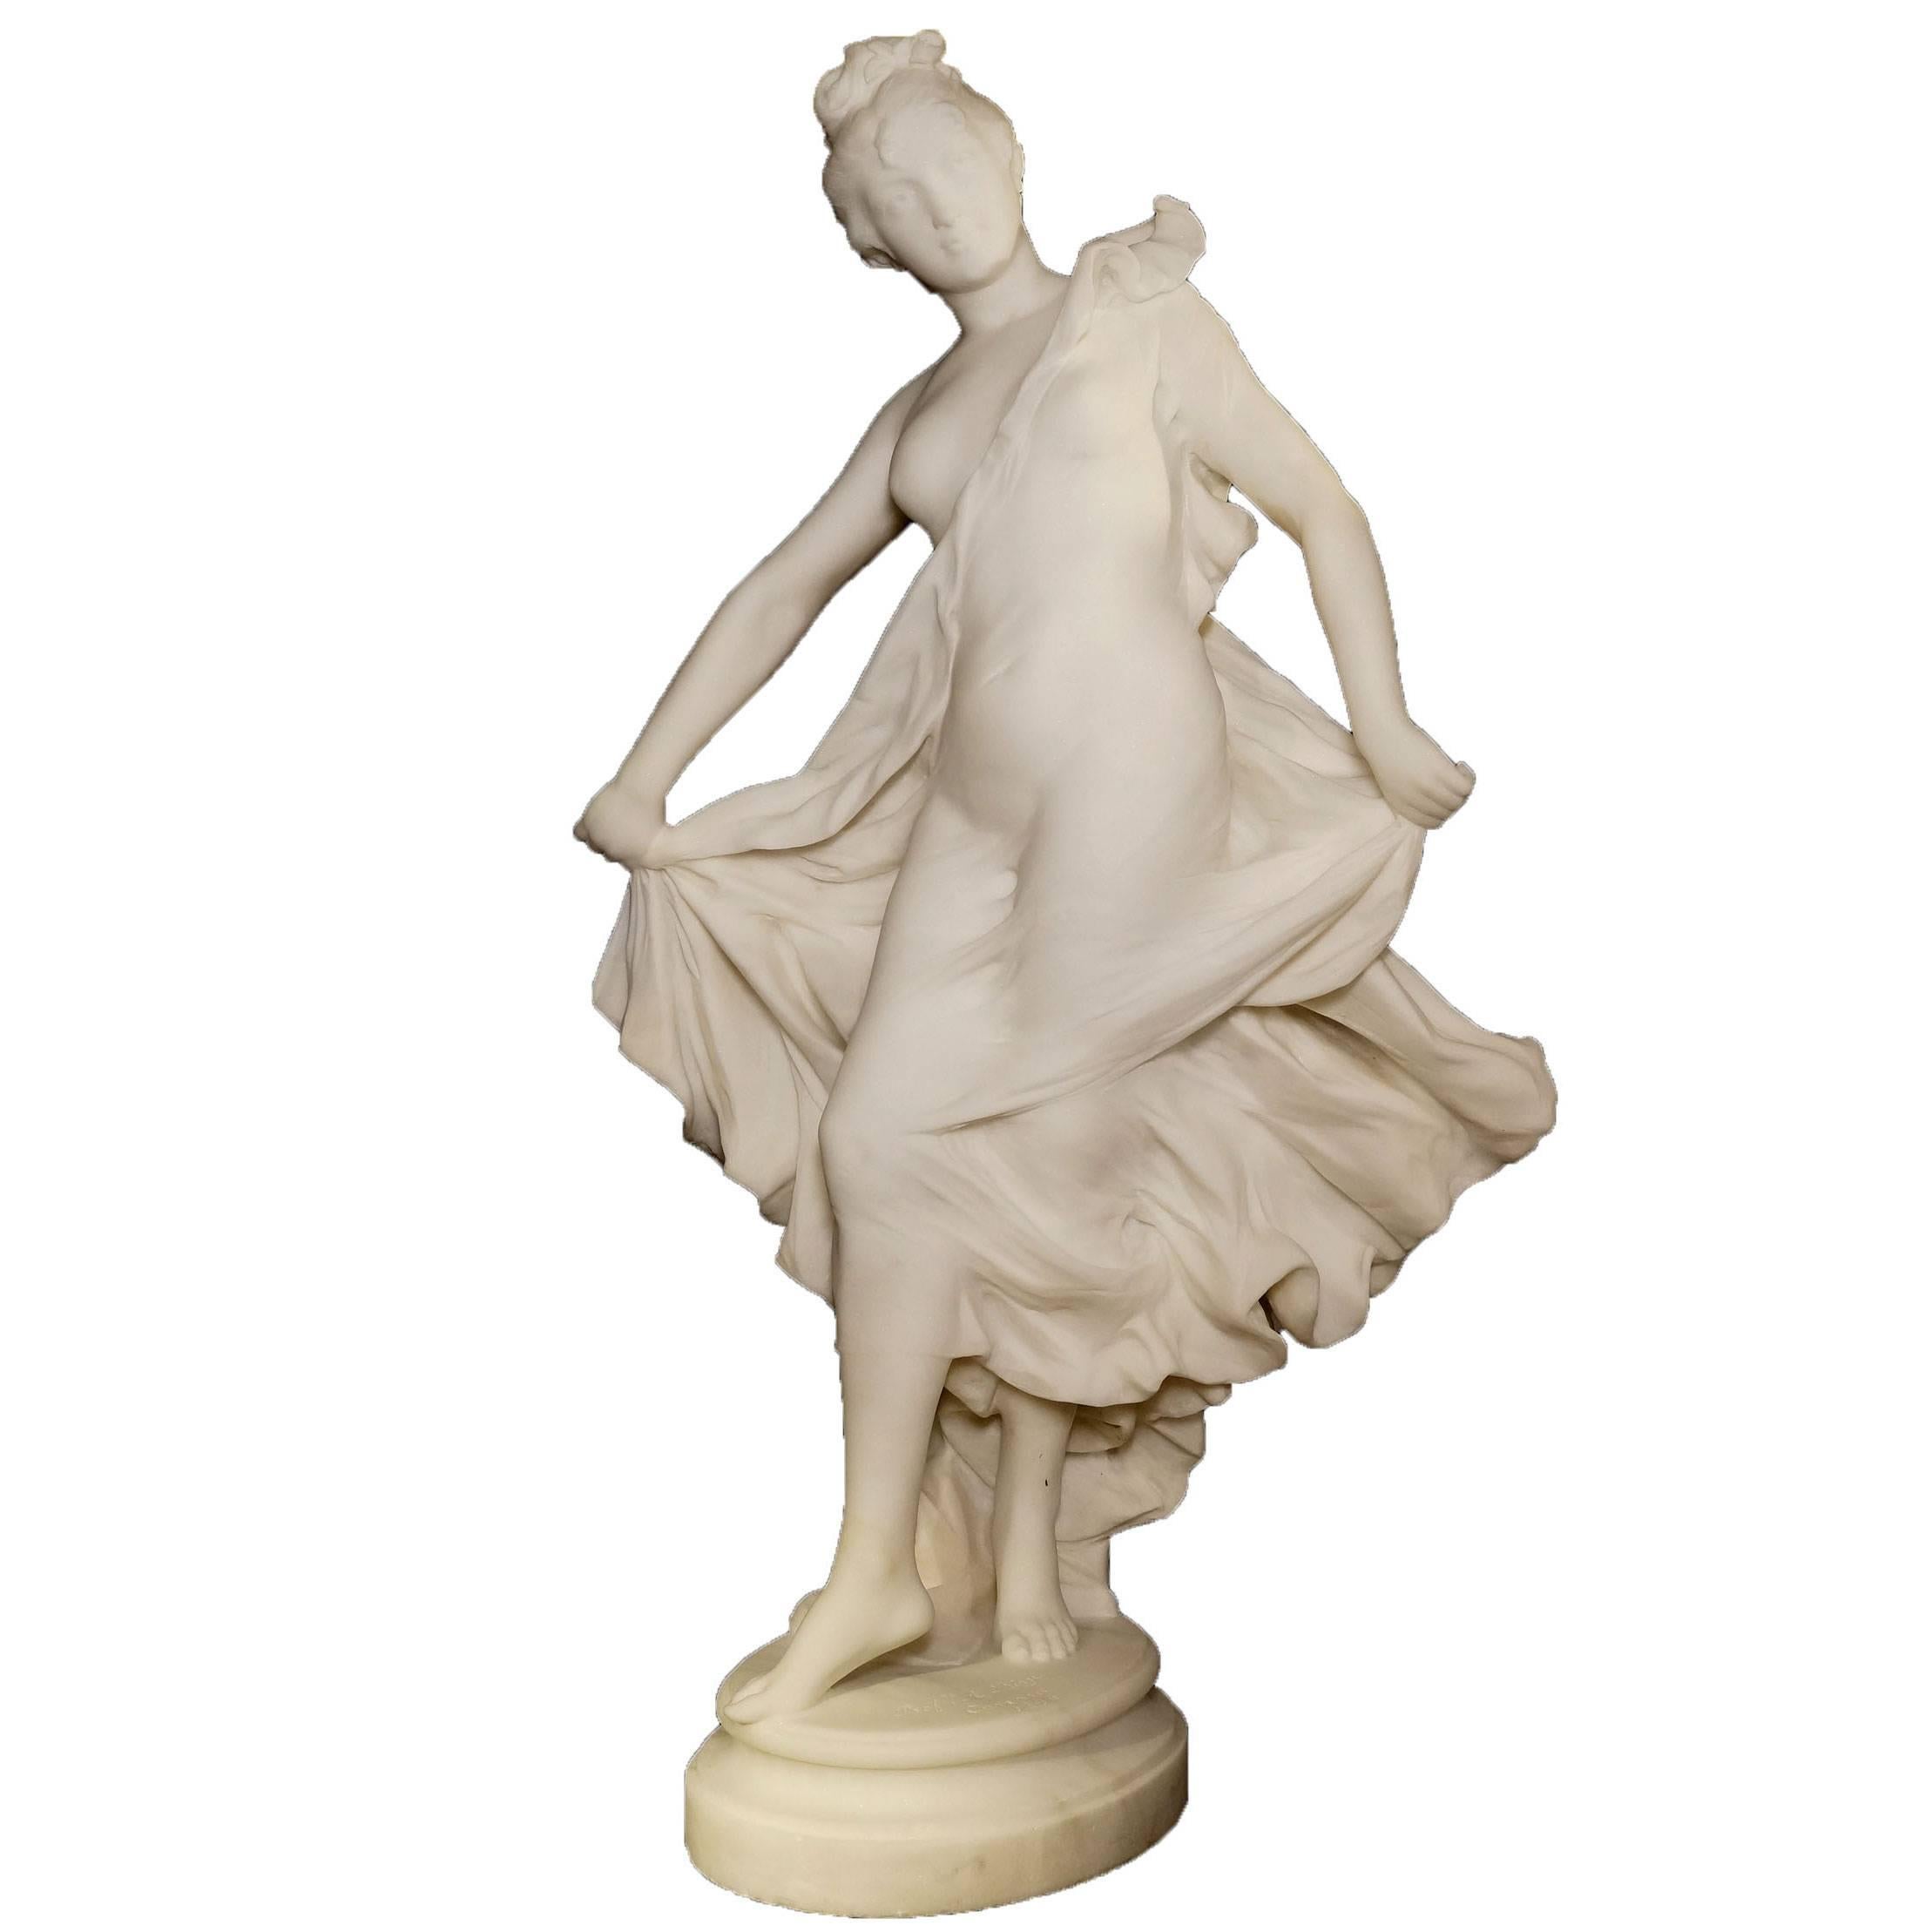 Fantastic Carved Italian White Marble Figure of a Standing Semi Nude Maiden